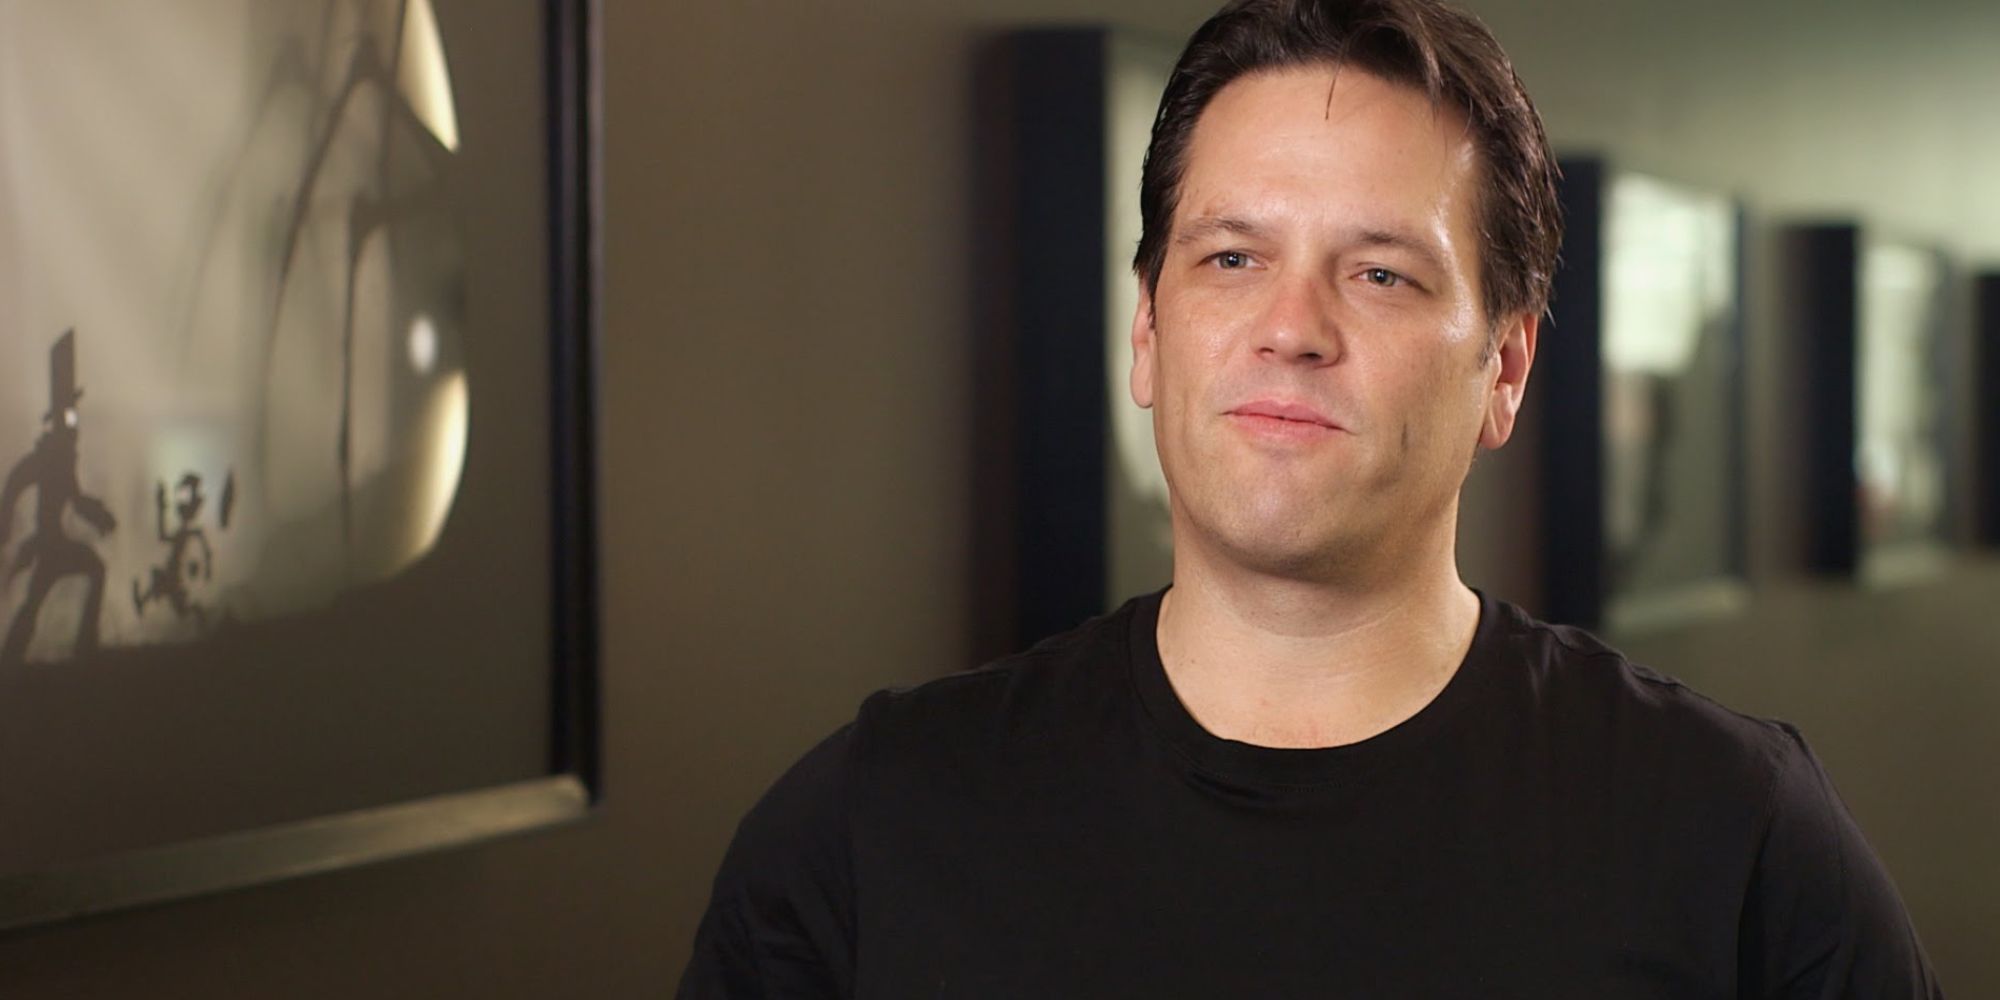 Phil Spencer Responds To Xbox Layoffs, Calls It A 'Difficult